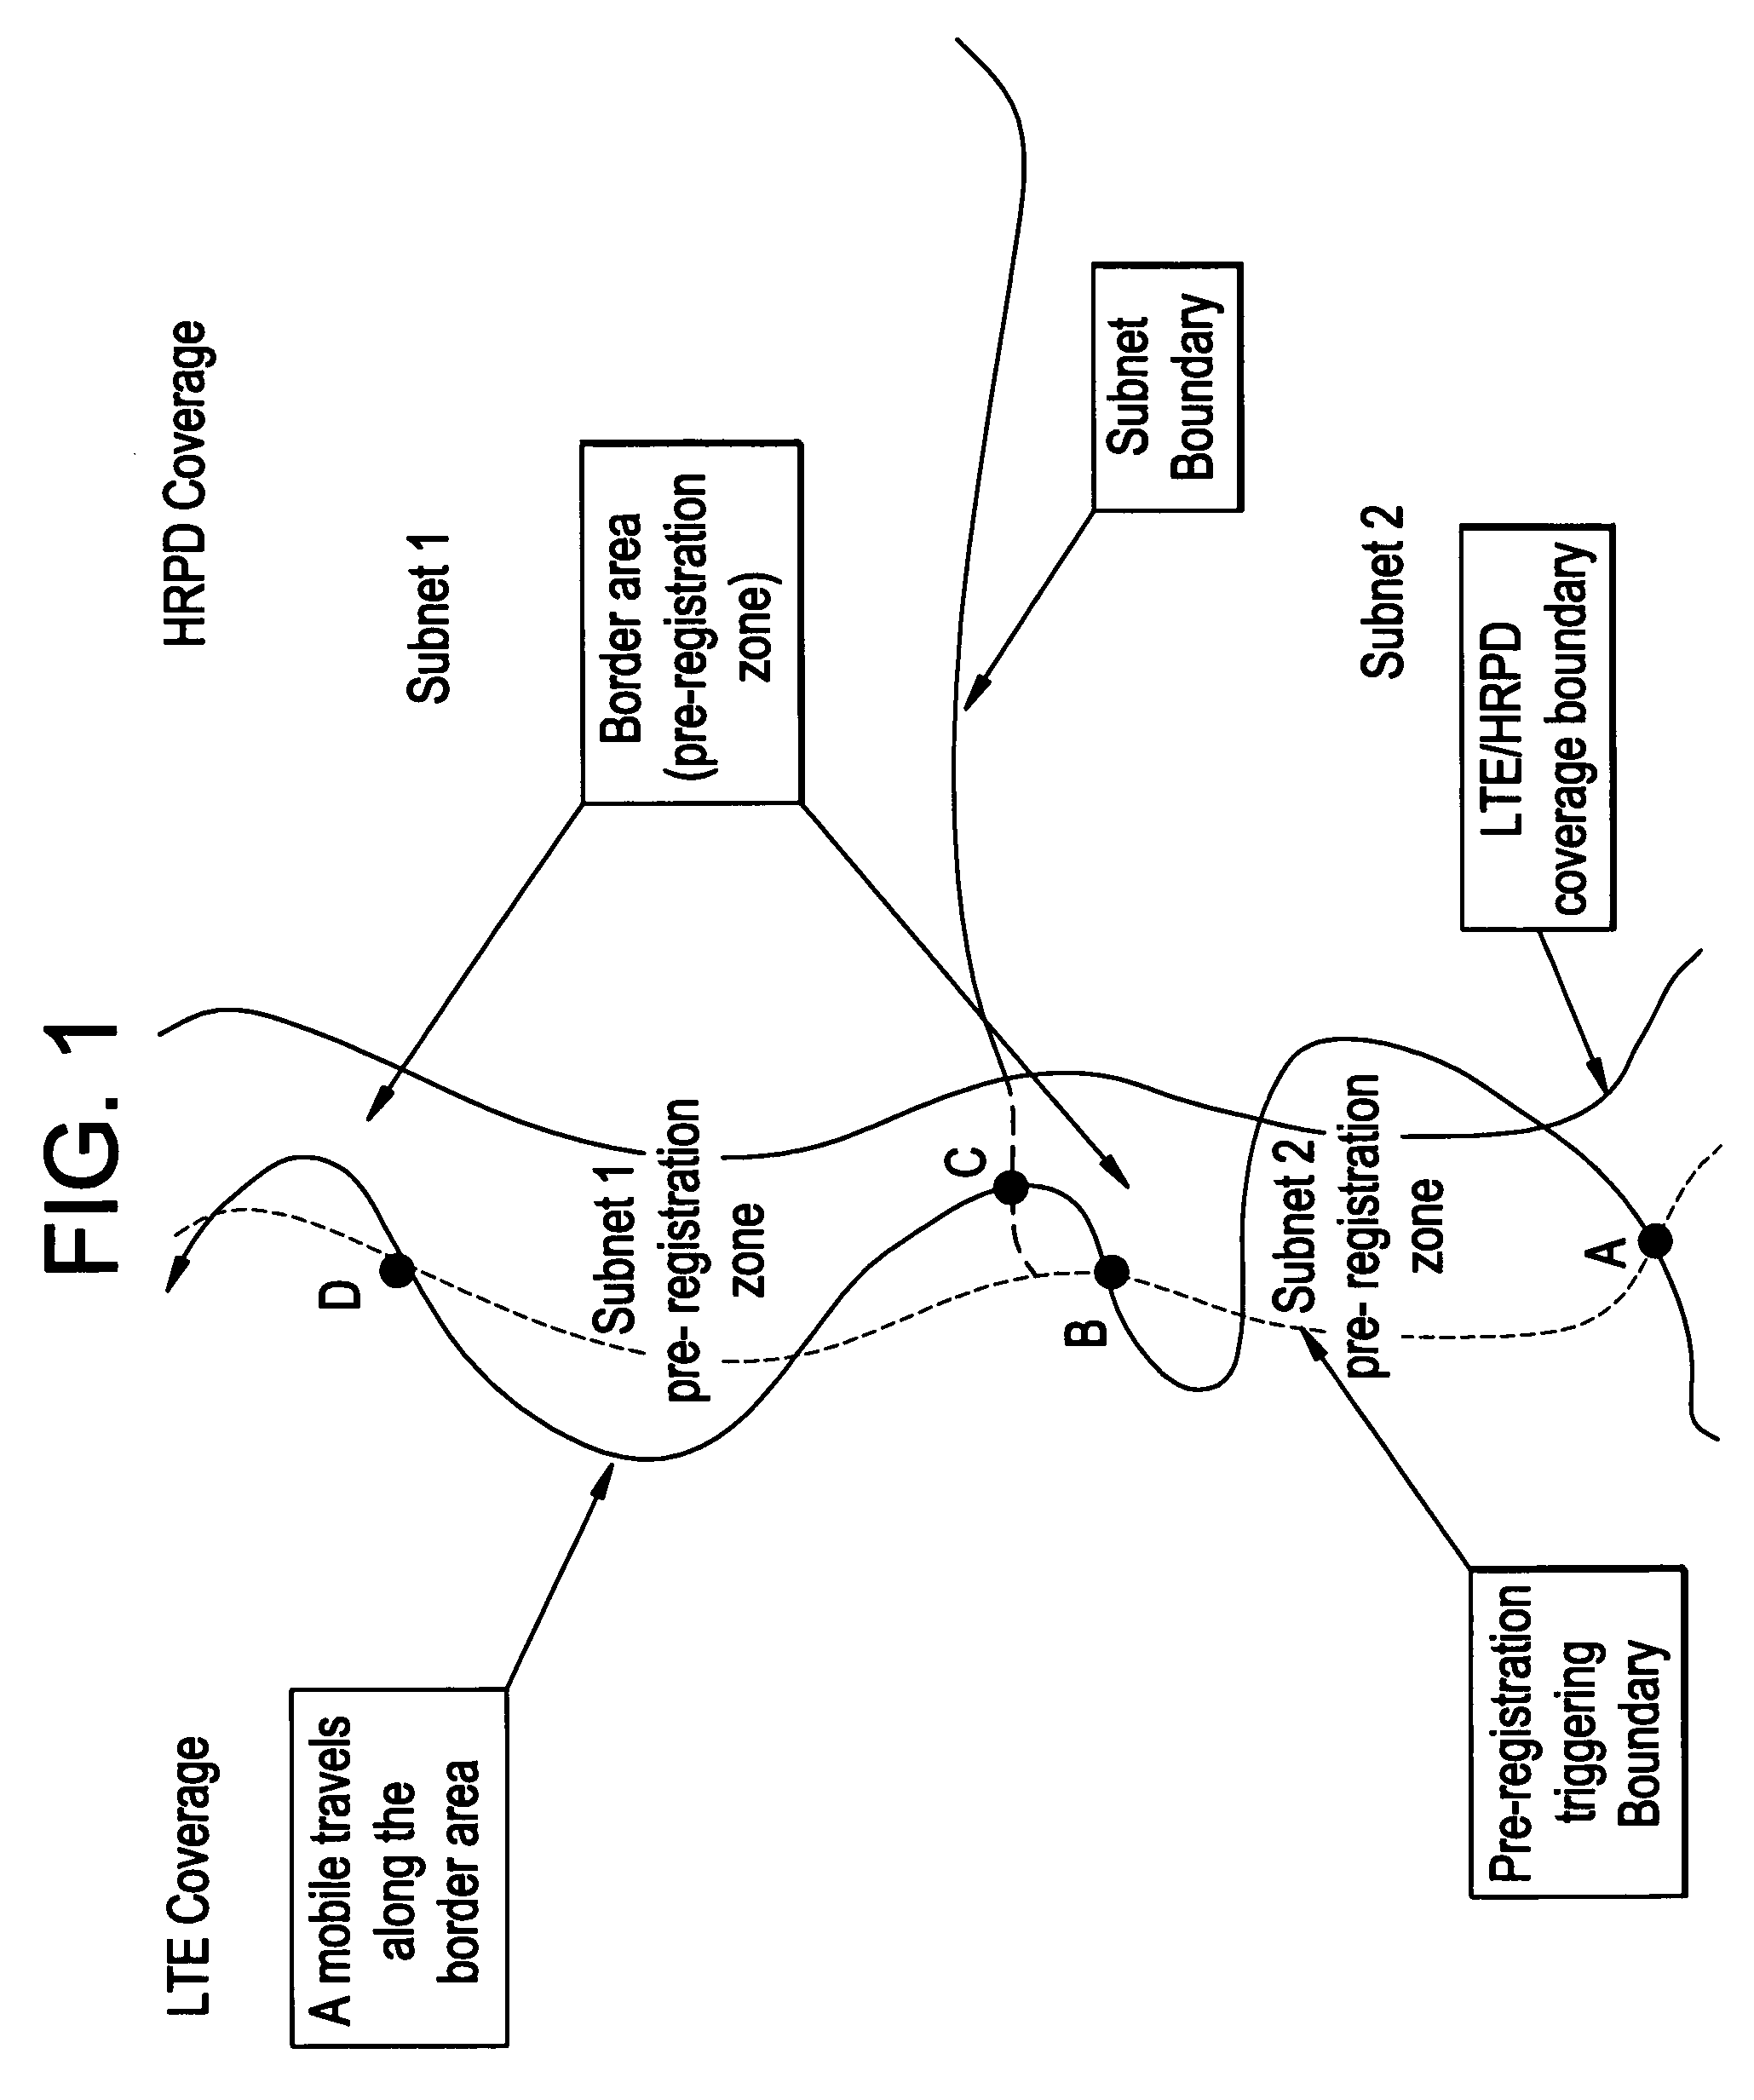 Pre-registration, storing of pre-registration session information and session transfer in a wireless communication system